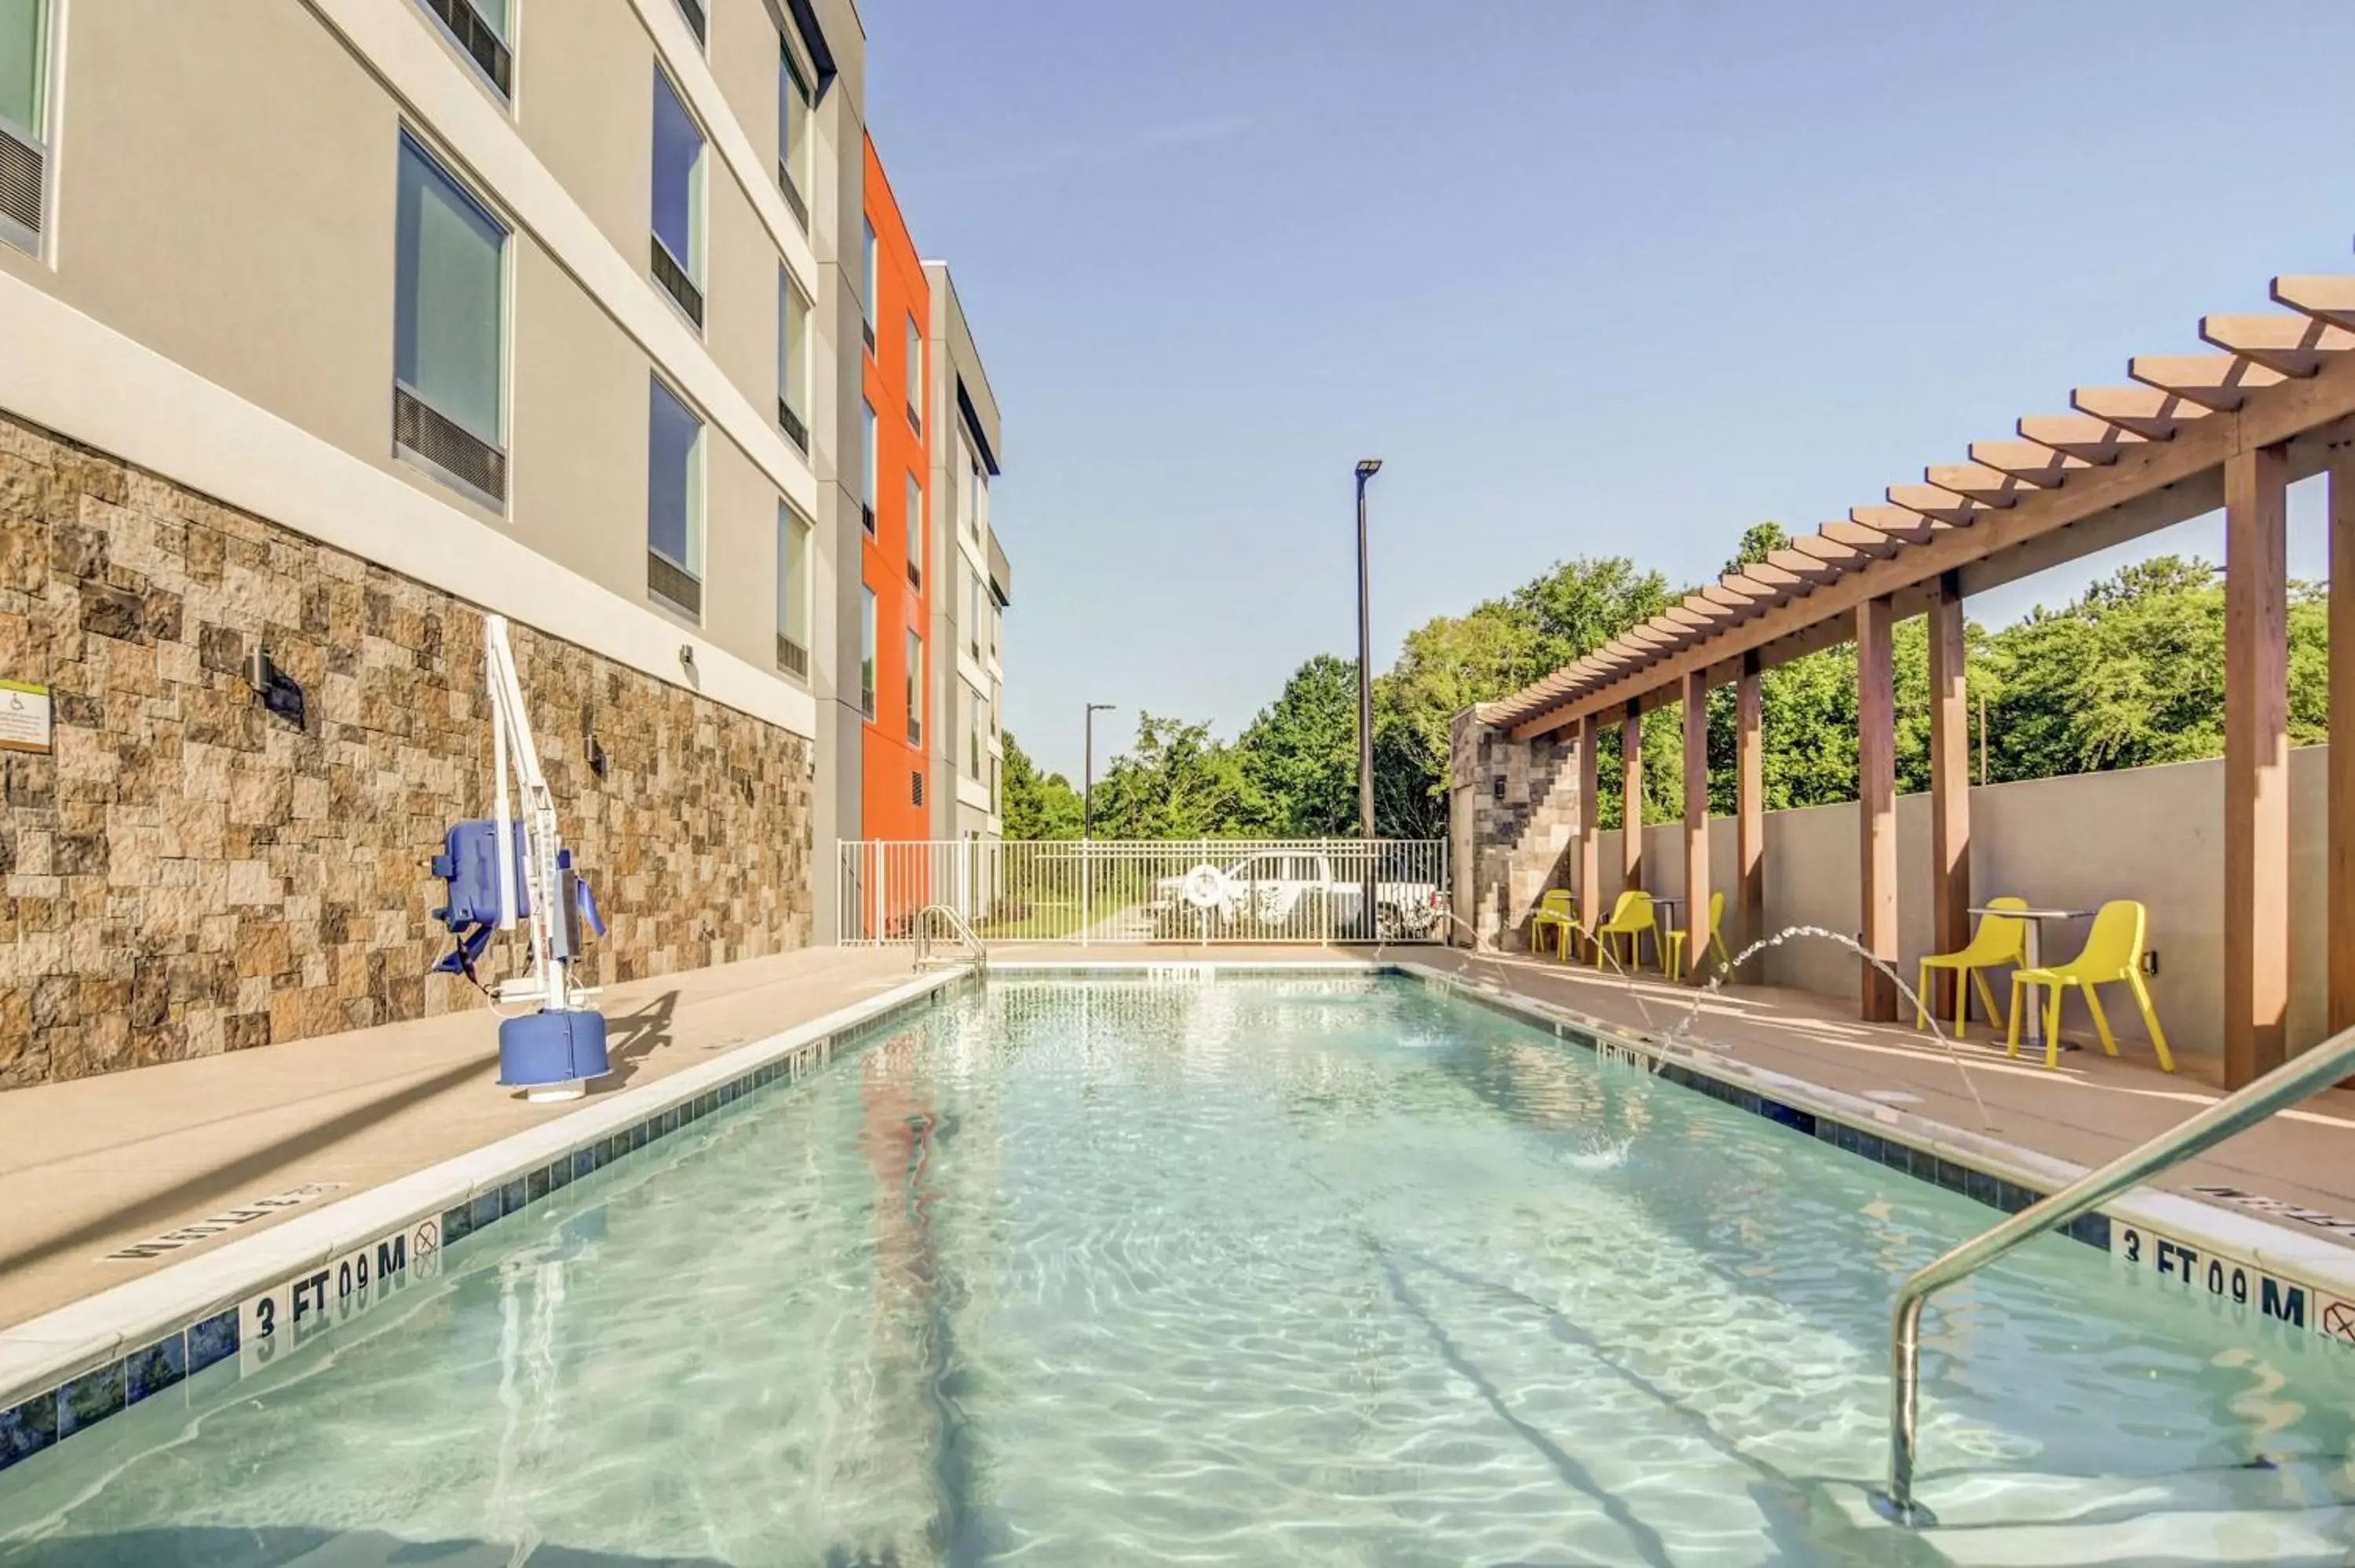 Property building, Swimming Pool in Home2 Suites By Hilton Foley